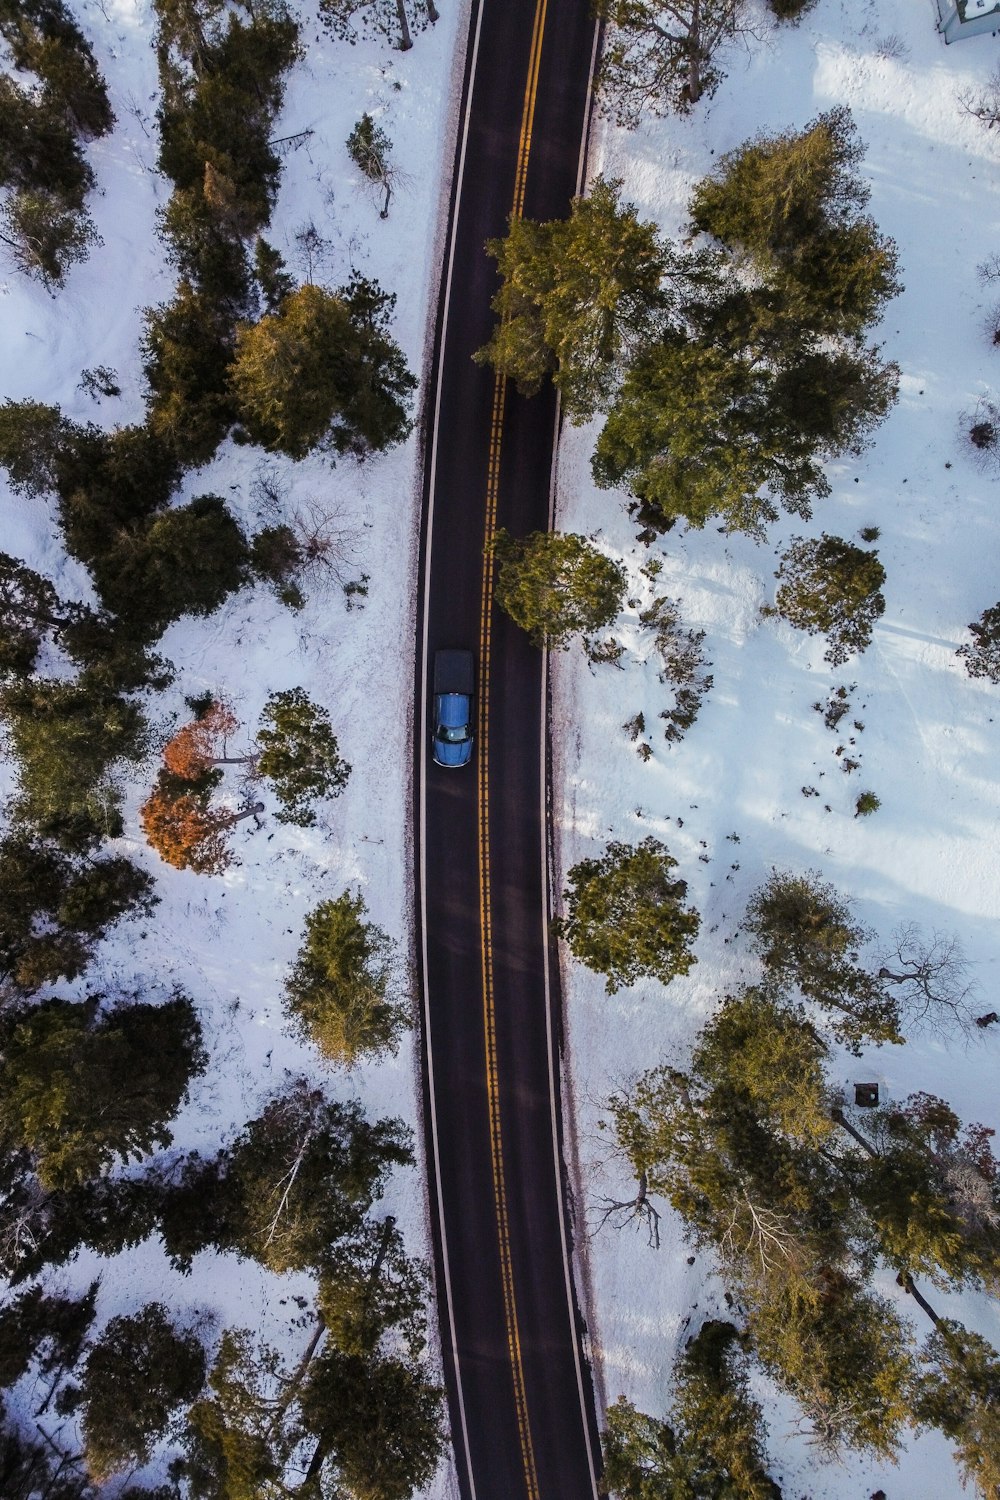 an aerial view of a car driving on a snowy road